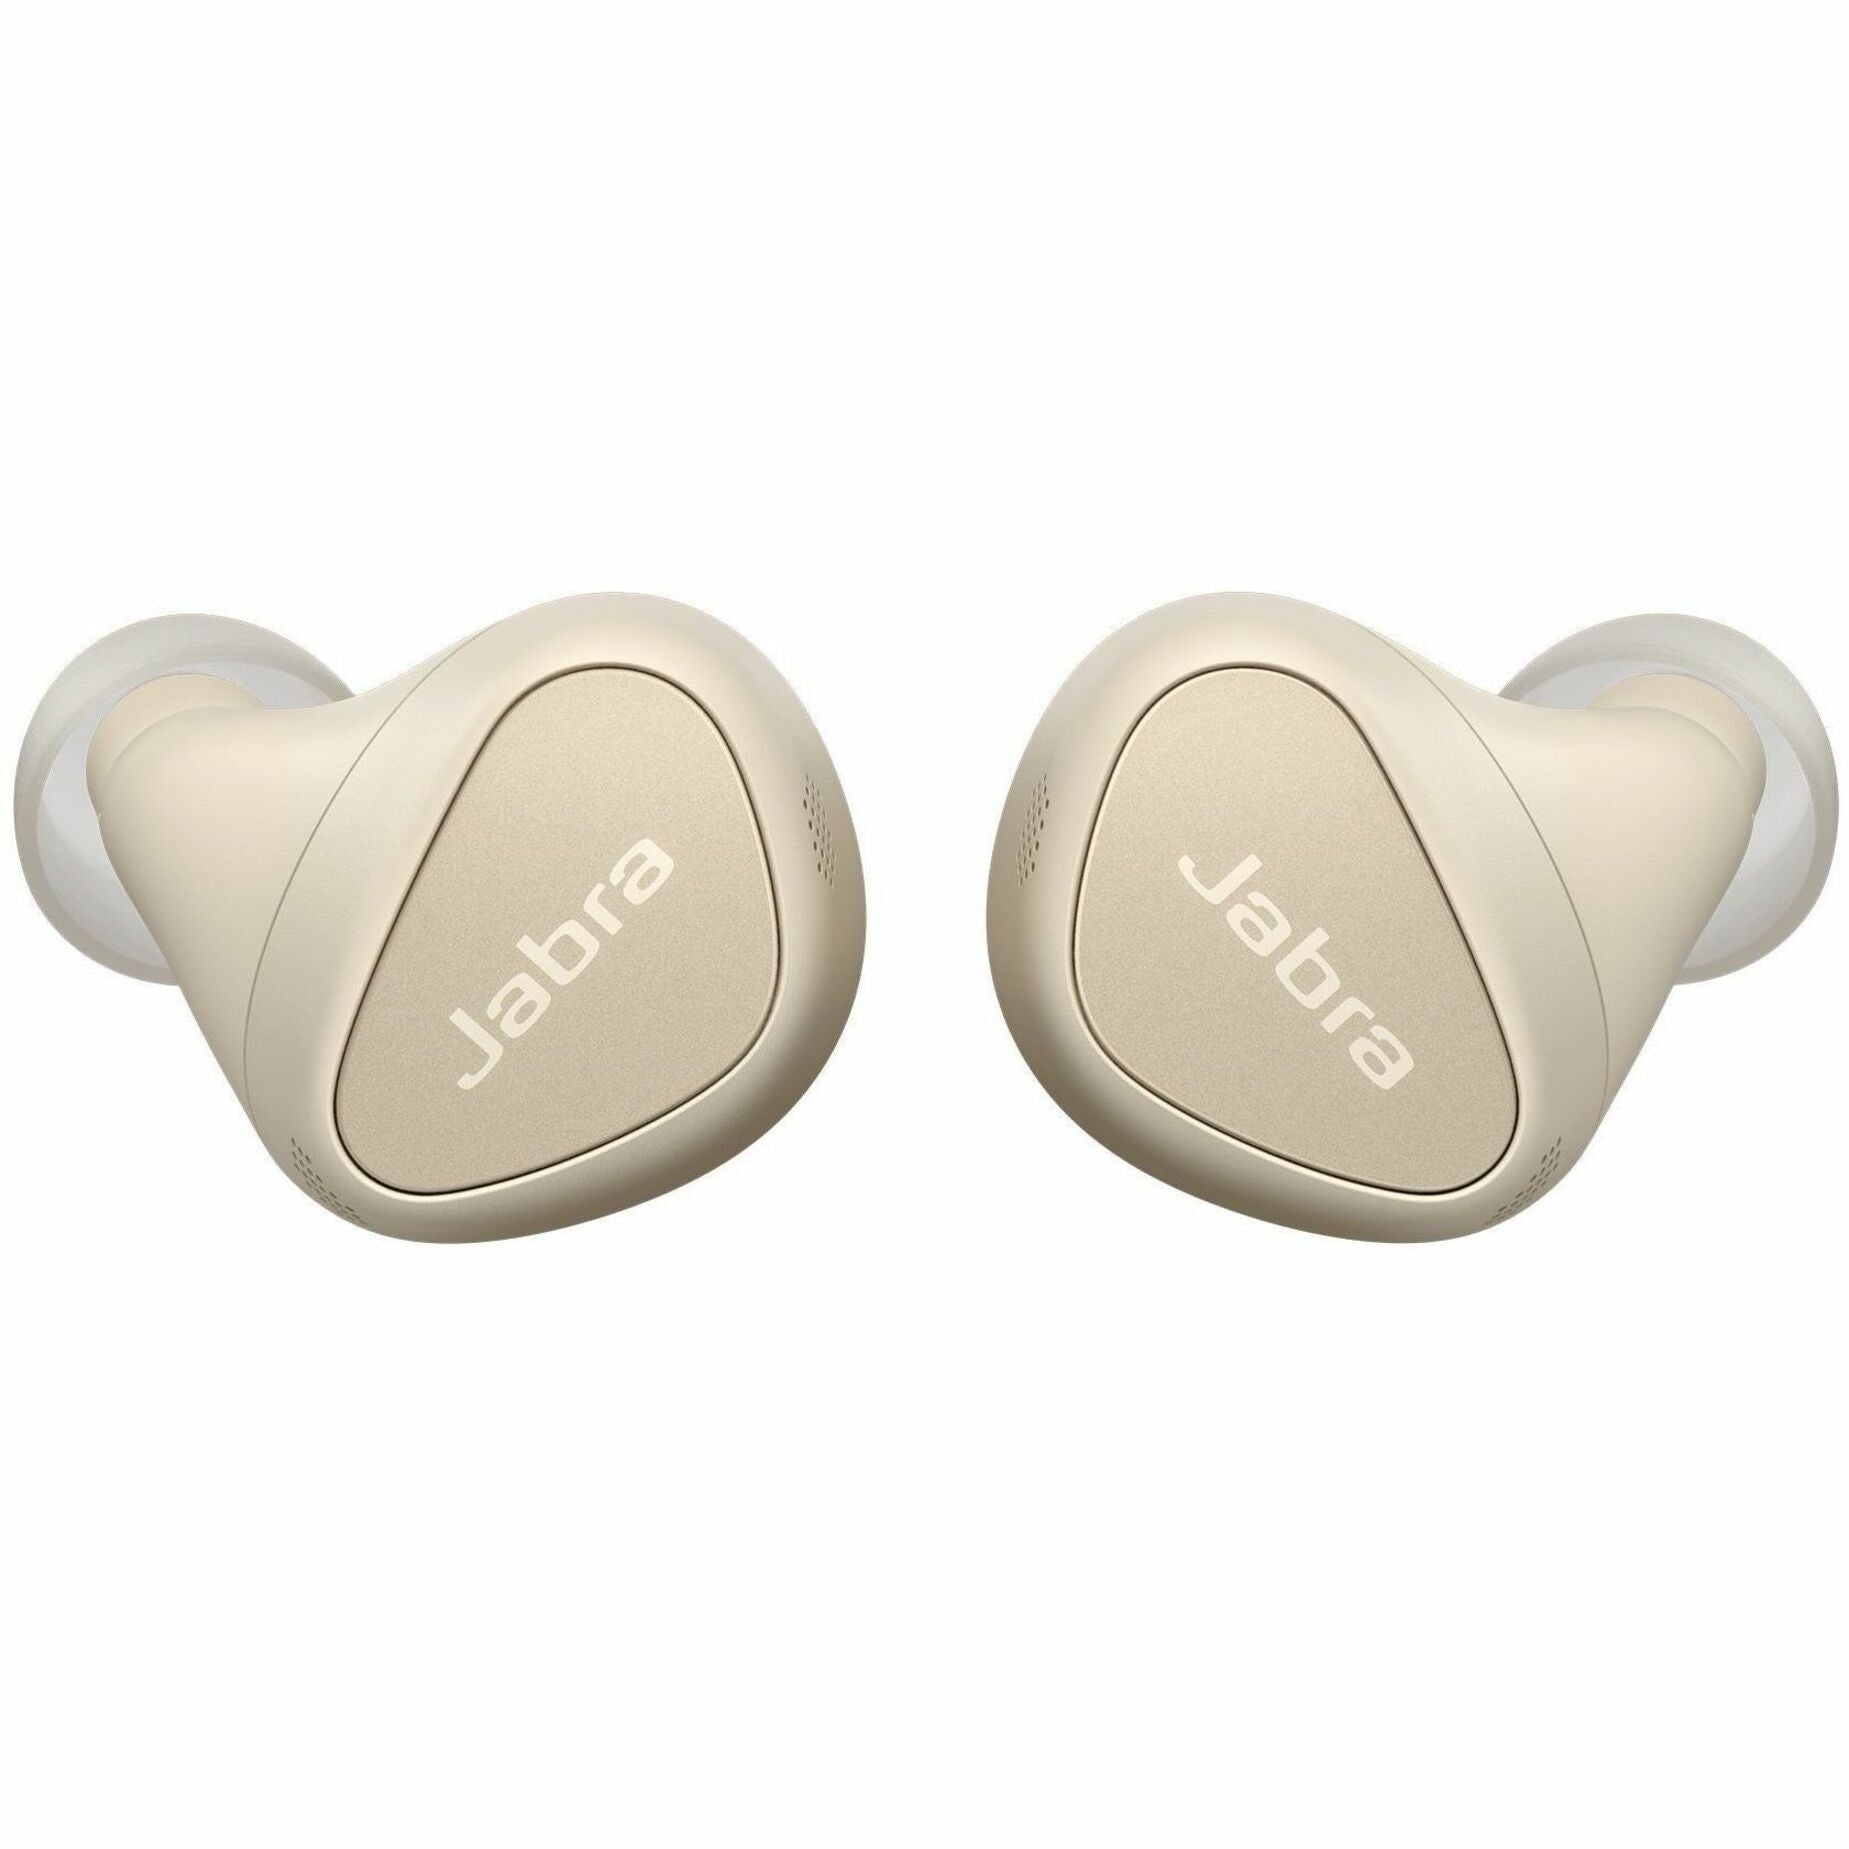 Jabra 100-99280901-99 Elite 10 Earset, Binaural Earbud with 2 Year Warranty, Integrated Microphone, Android/Windows Compatible, IP57 Rated, Rechargeable Battery, Volume/Play/Pause Controls, Cream Color